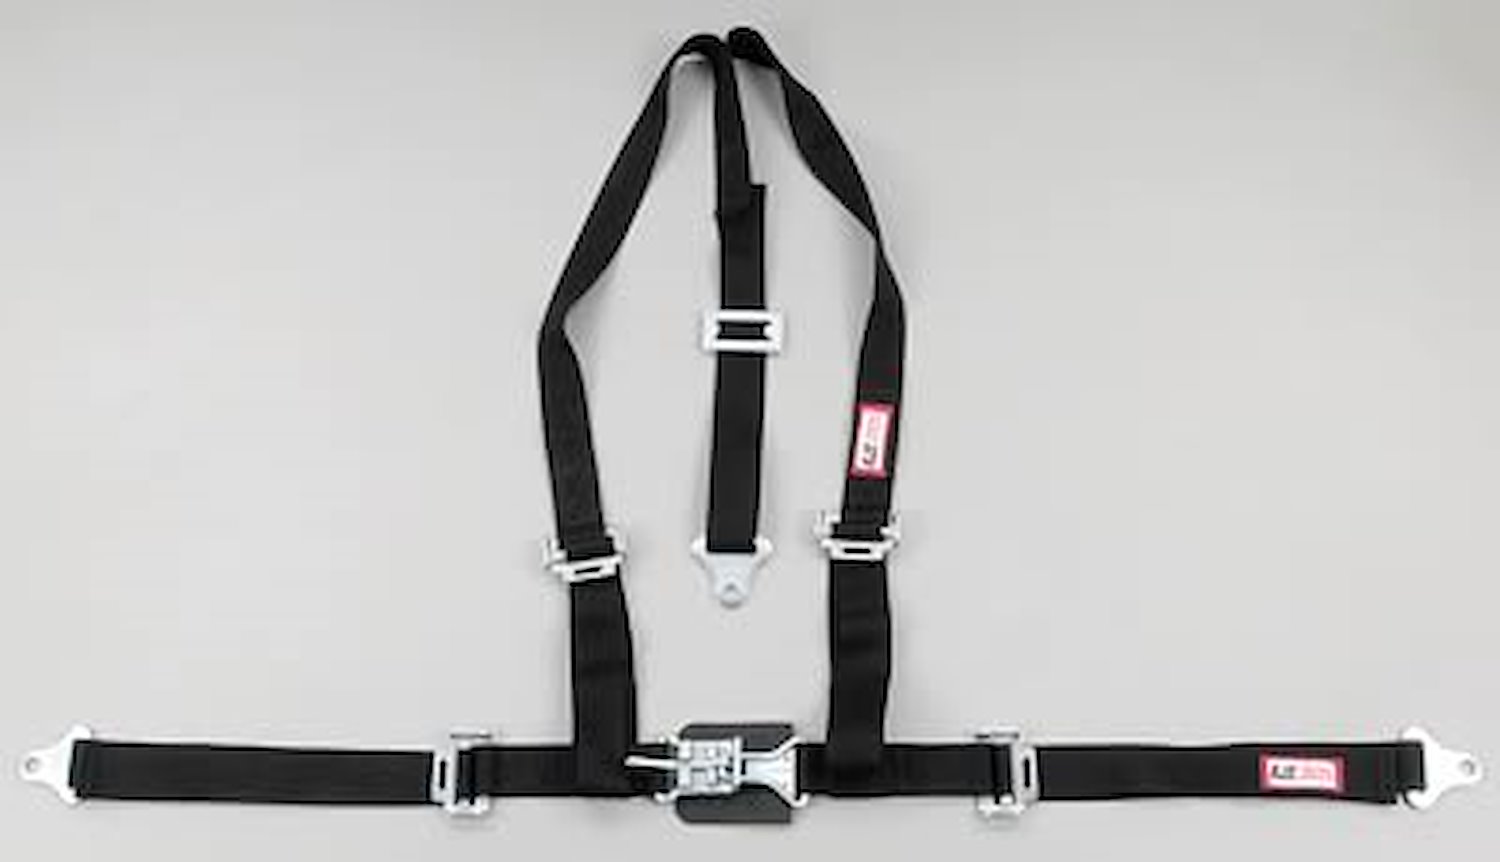 NON-SFI L&L HARNESS 2 PULL DOWN Lap Belt SEWN IN 2 S.H. V ROLL BAR Mount w/STERNUM STRAP ALL SNAP ENDS BLACK